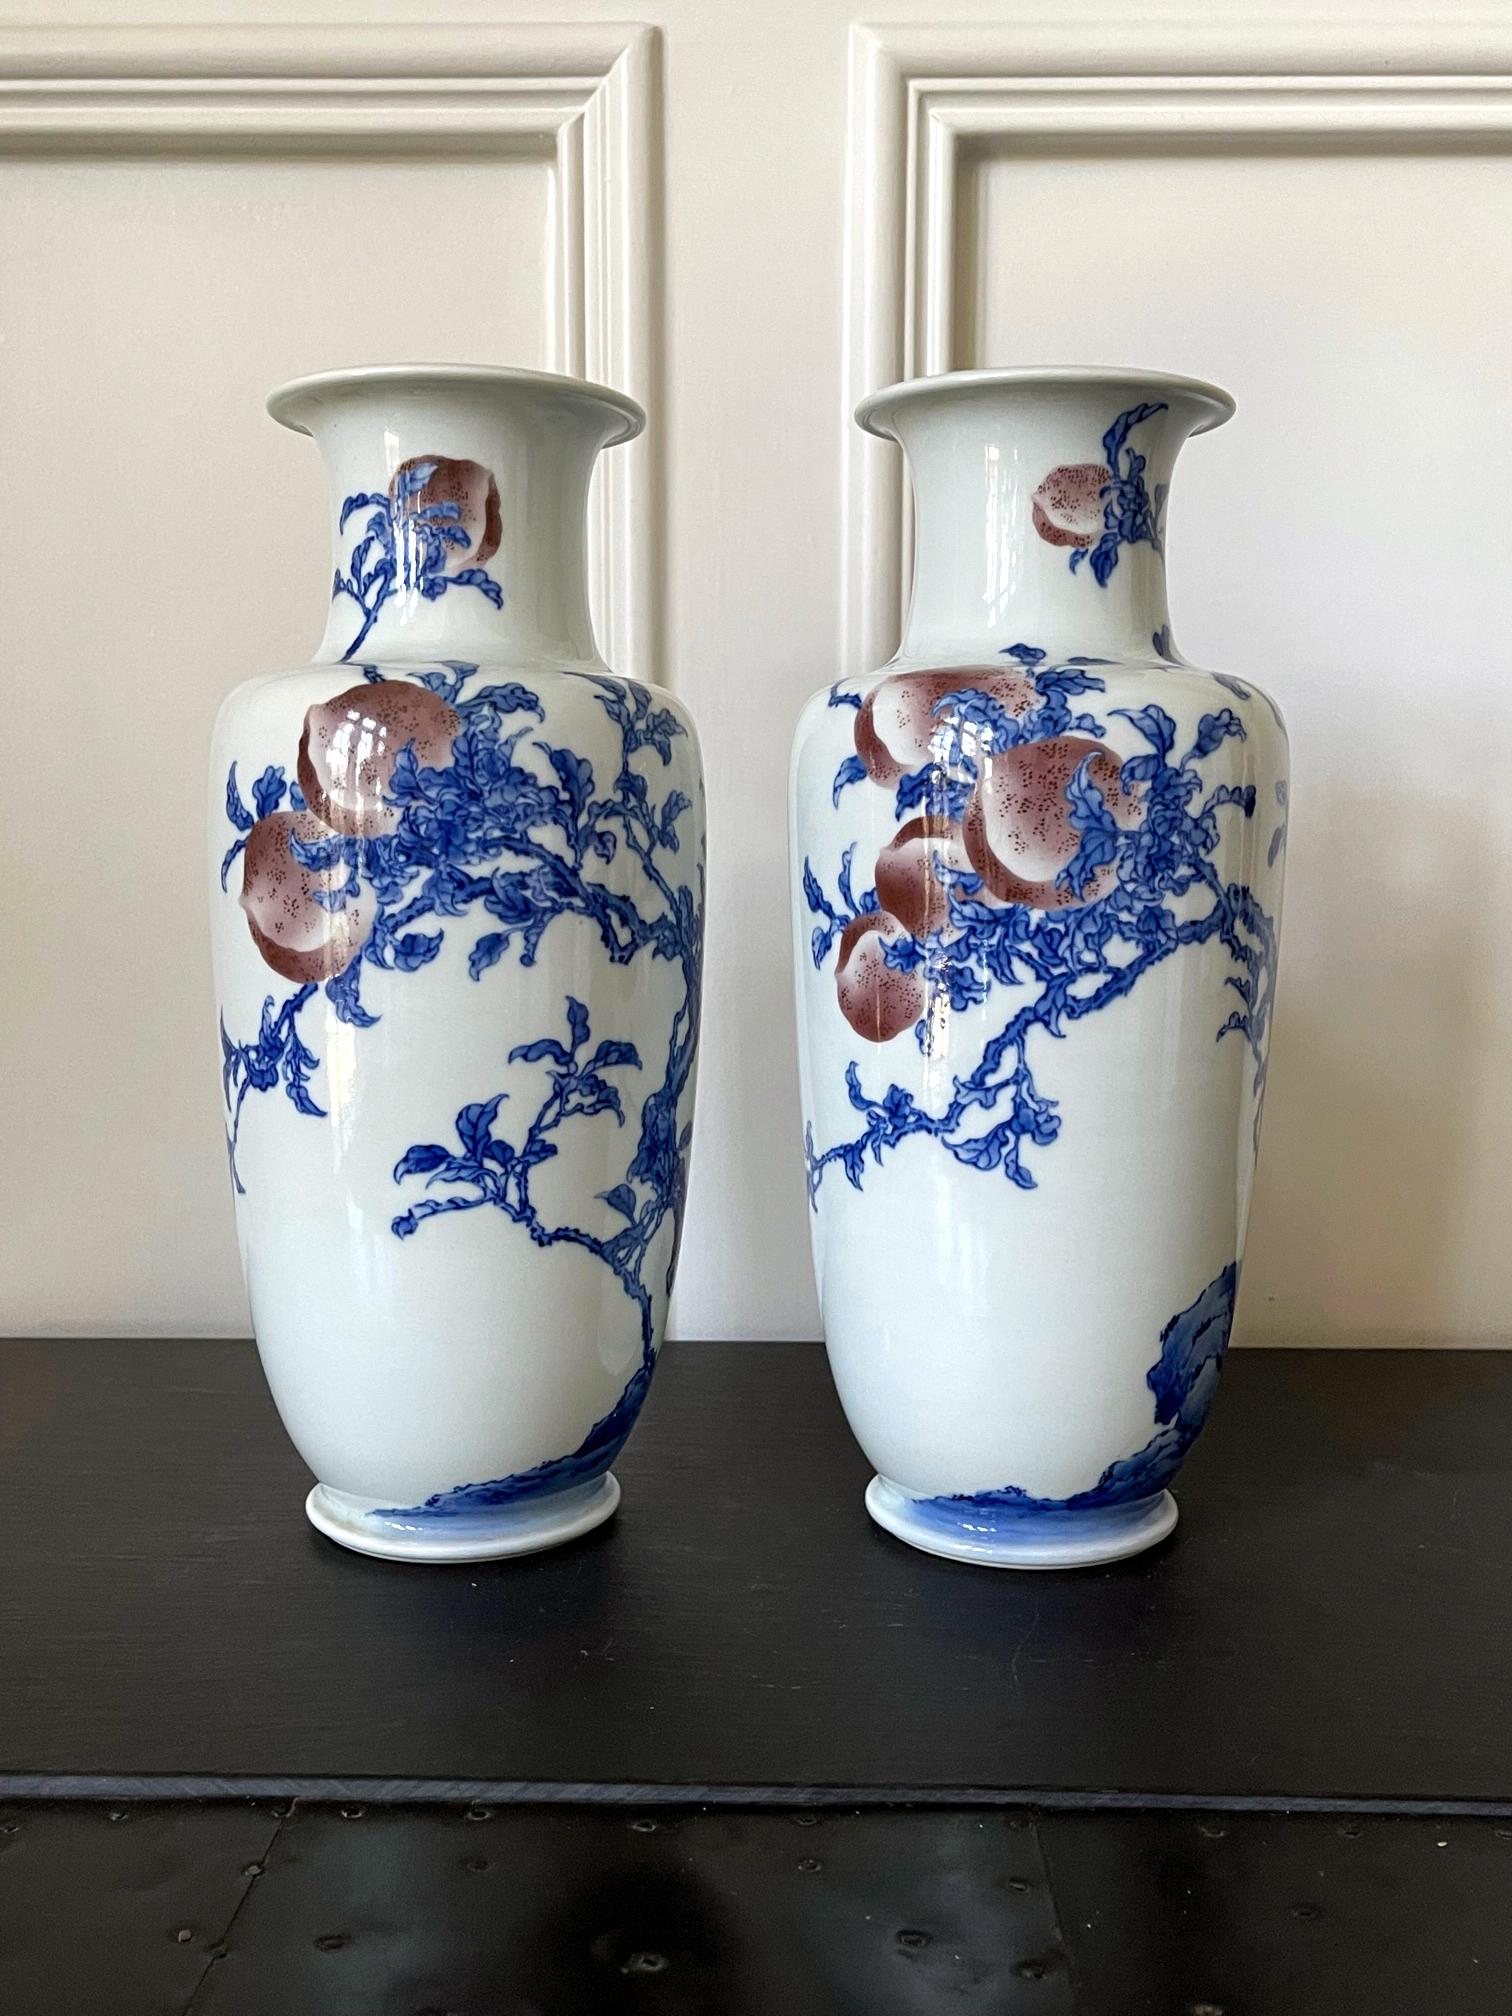 A pair of porcelain vases in classic form, decorated with underglaze blue and copper red painting by Imperial potter Makuzu Kozan. Also known as Miyagawa Kozan (1842–1916), Makuzu was one of the most established and collected ceramist known to the